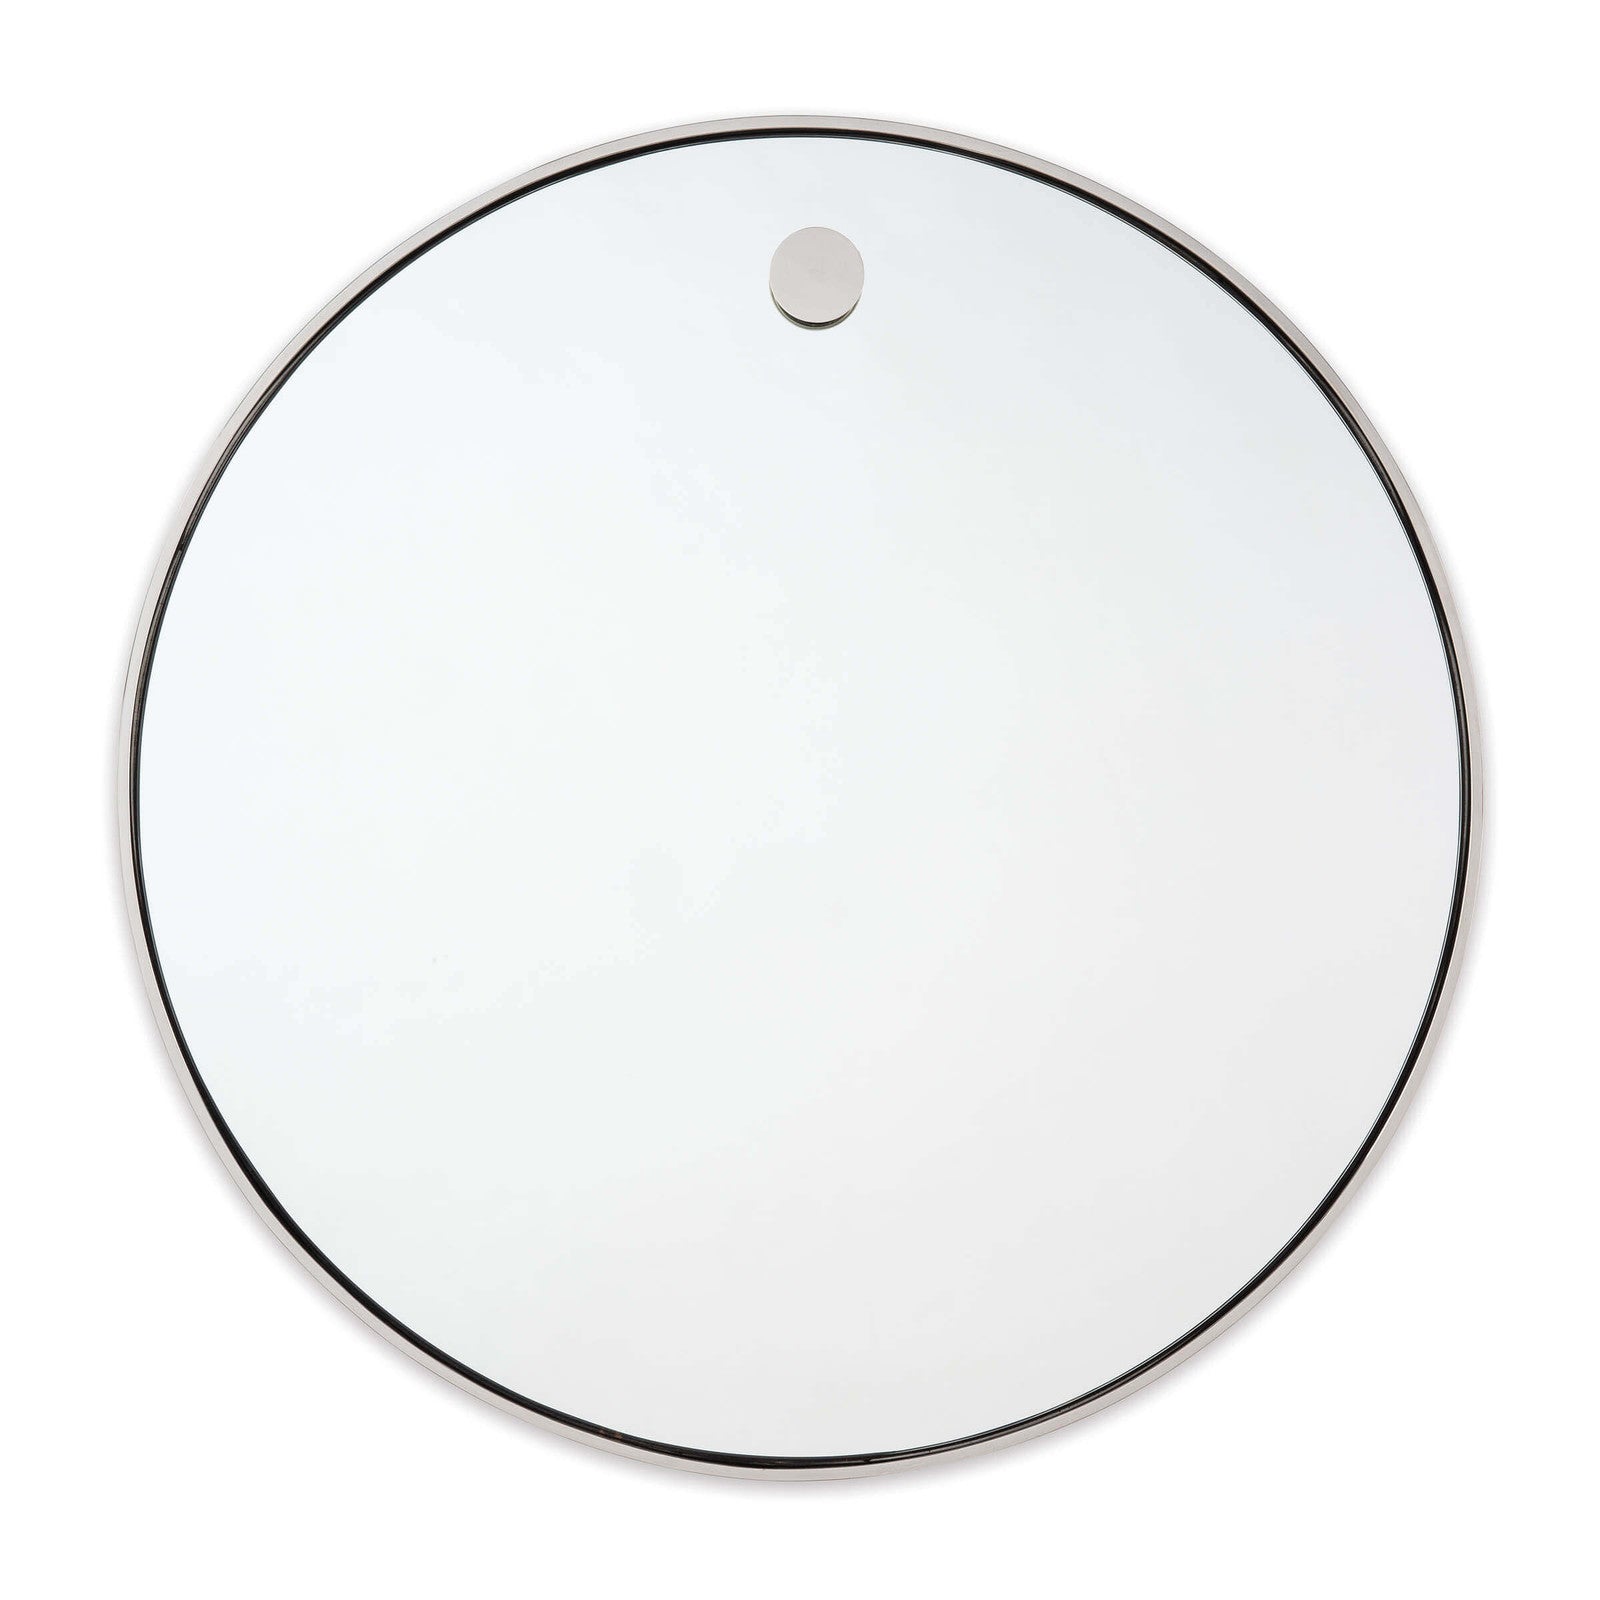 This Hanging Circular Mirror has simple details, while adding an elegant, versatile look to any living room, entryway, or other space.   Size: 36"h x 36"w x 1"d Frame Width: .125 Inner Mirror Dimensions: 35.5